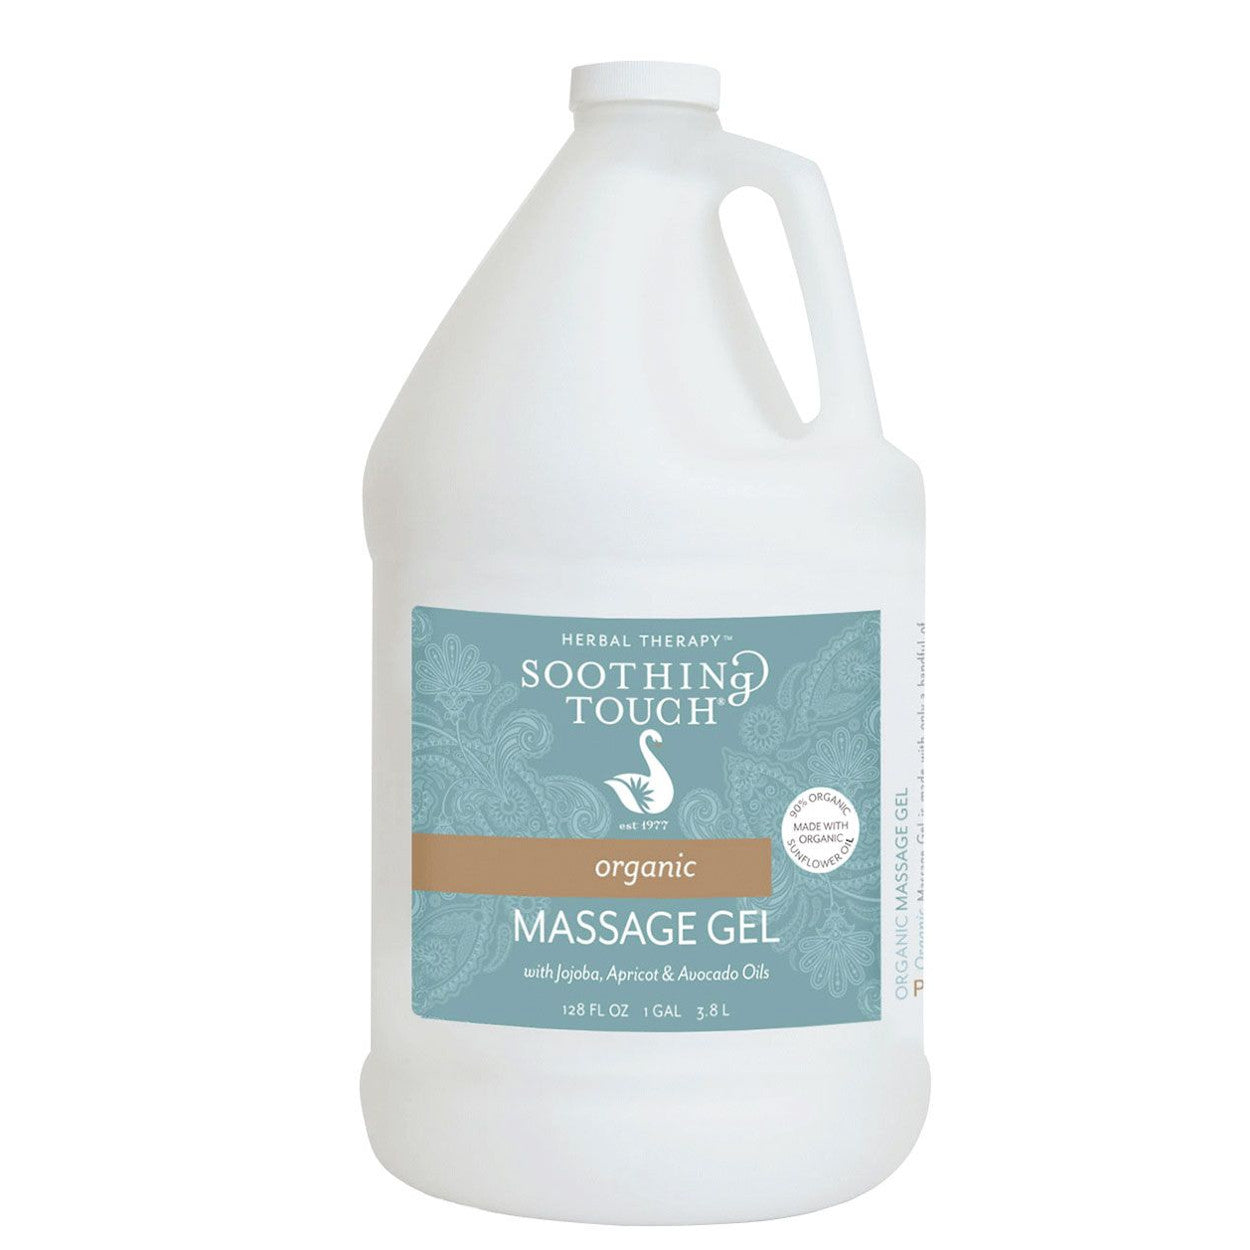 Soothing Touch Organic Massage Gel